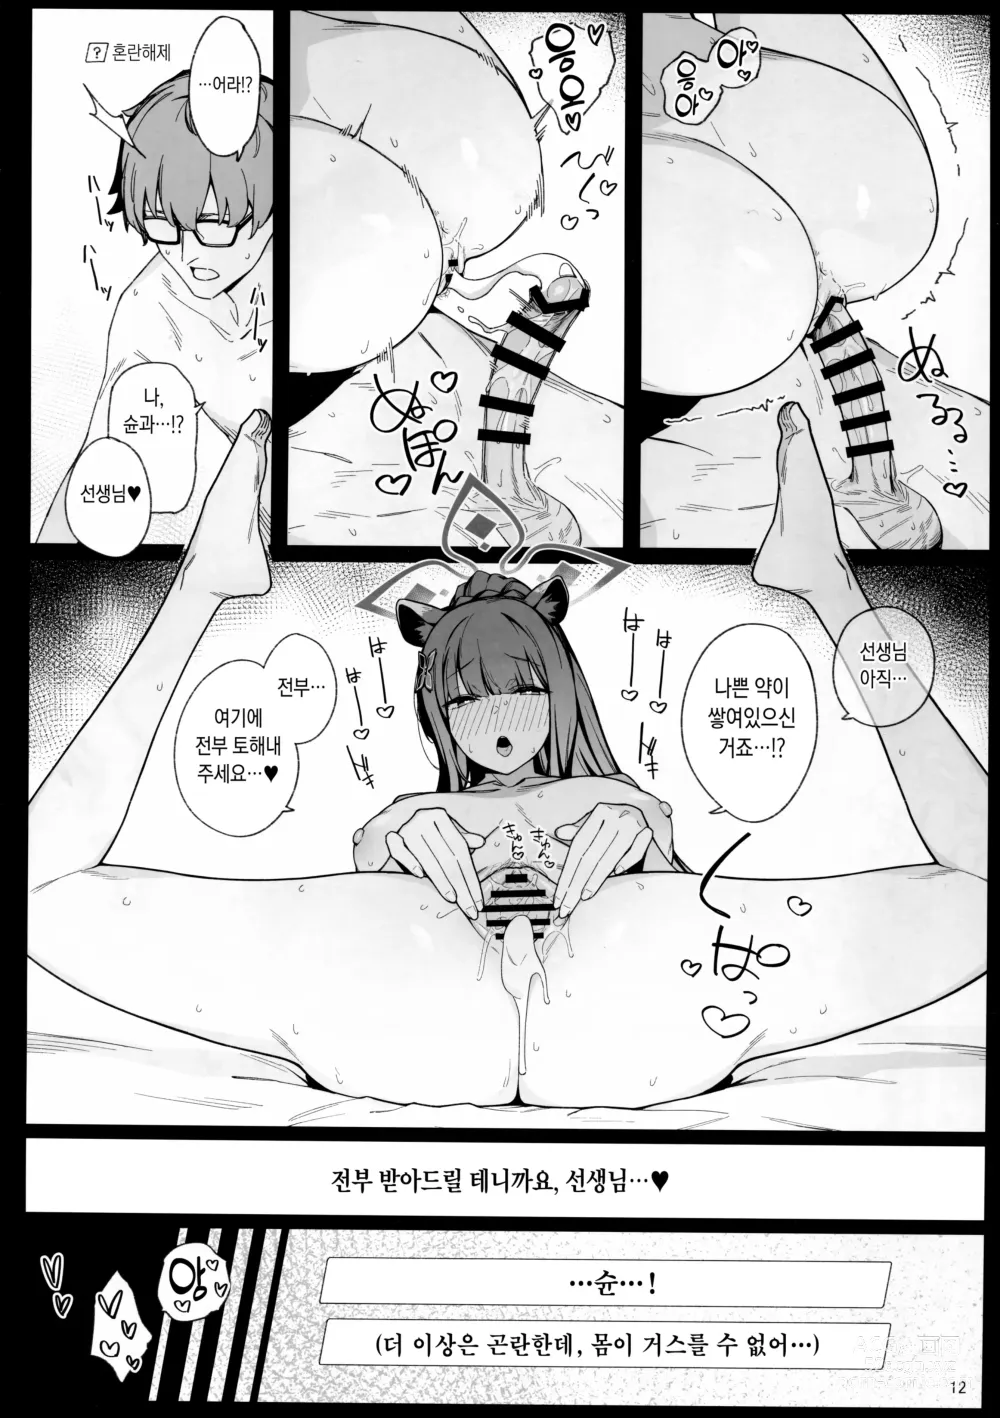 Page 12 of doujinshi 춘중독